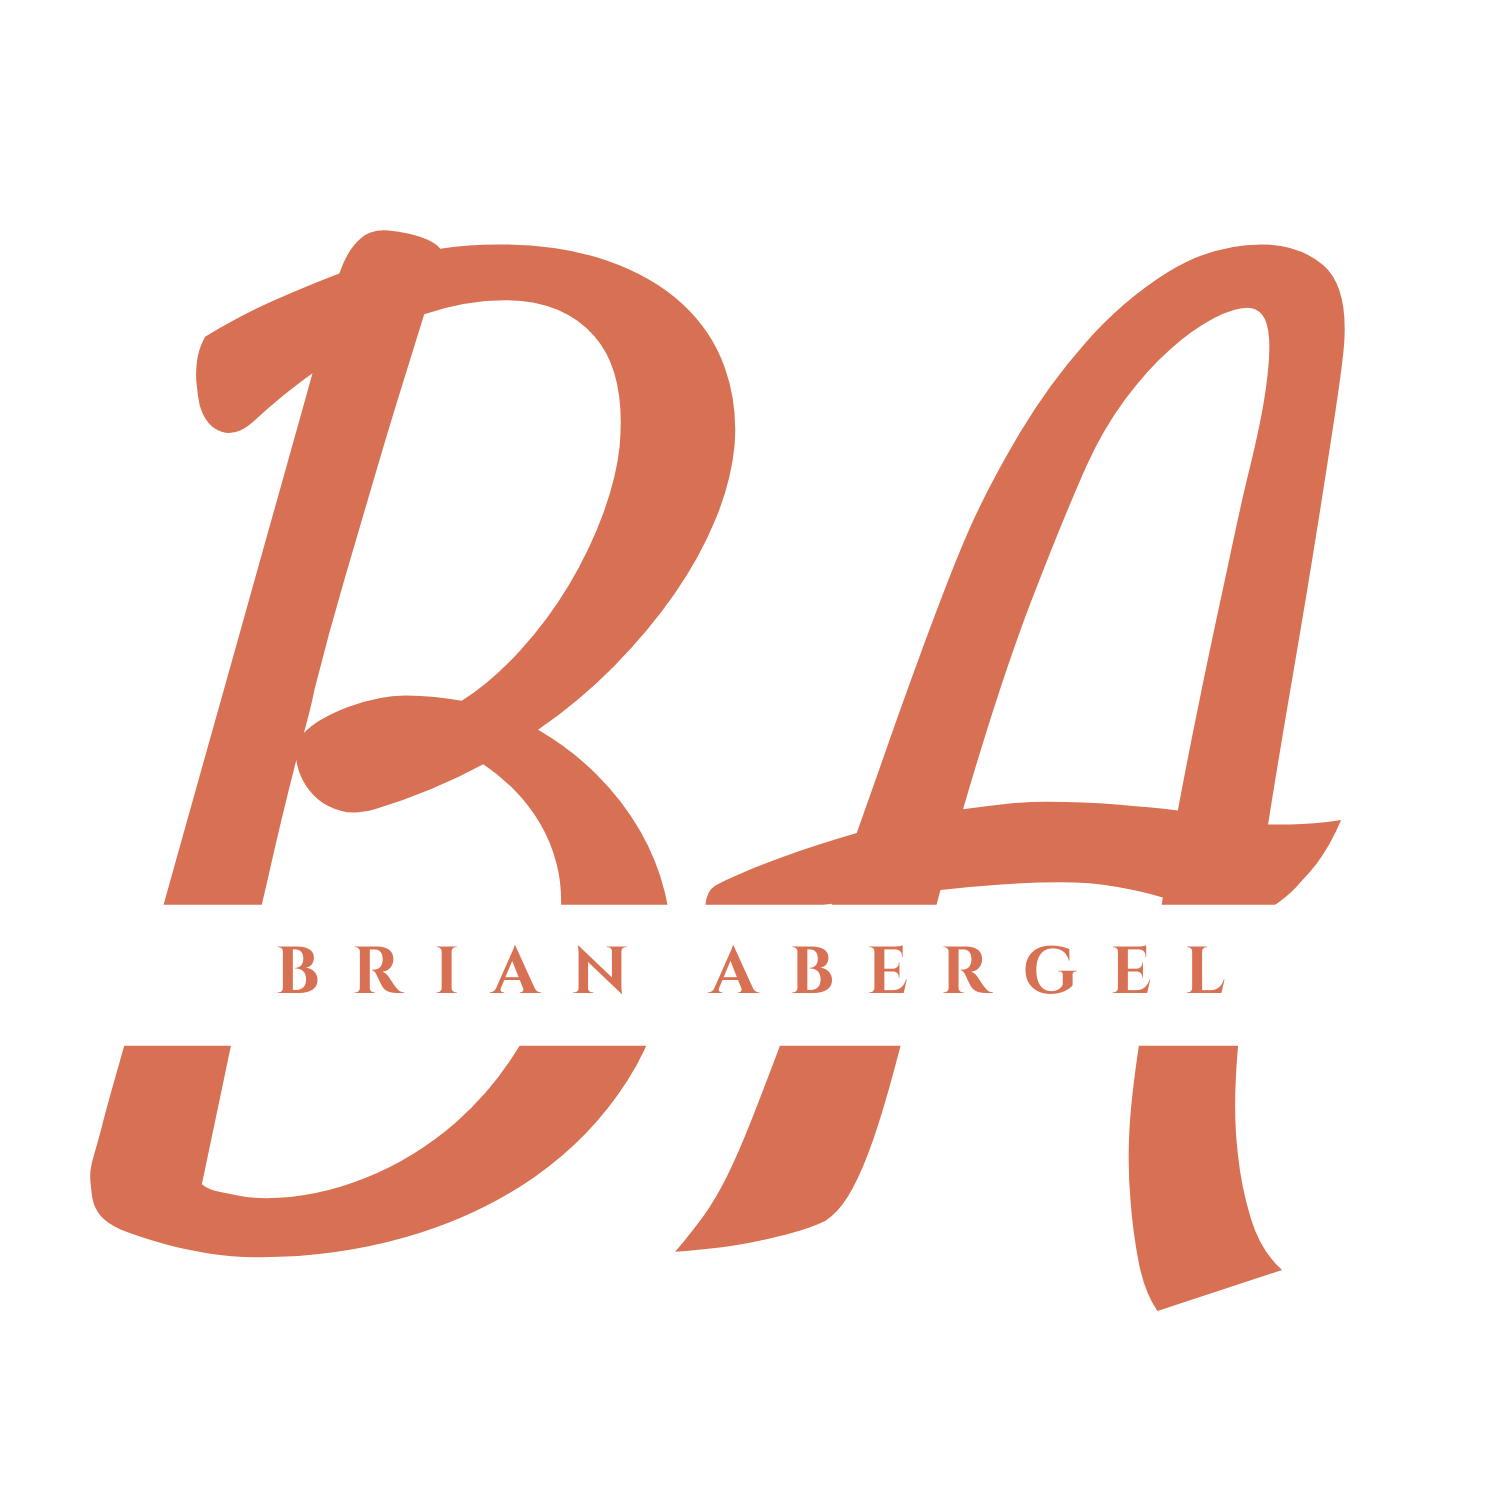 Brian Abergel | Professional Overview